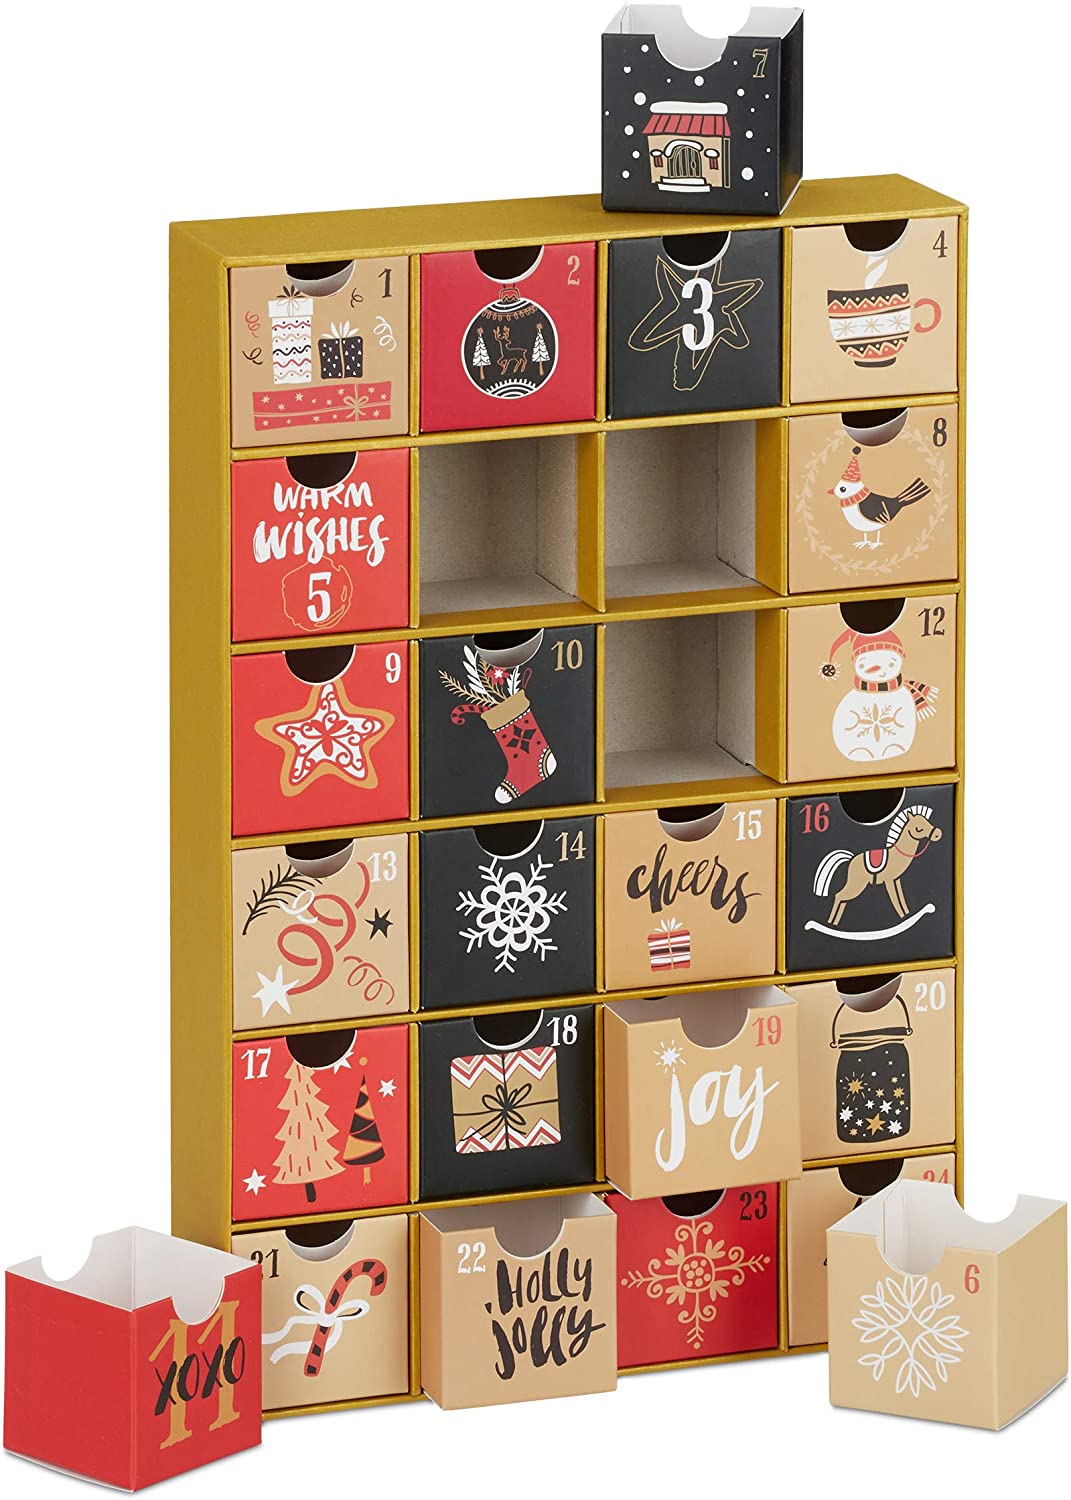 Relaxdays children’s and adults’ Advent calendar for filling, 24 boxes, reusable, Christmas calendar, various colours